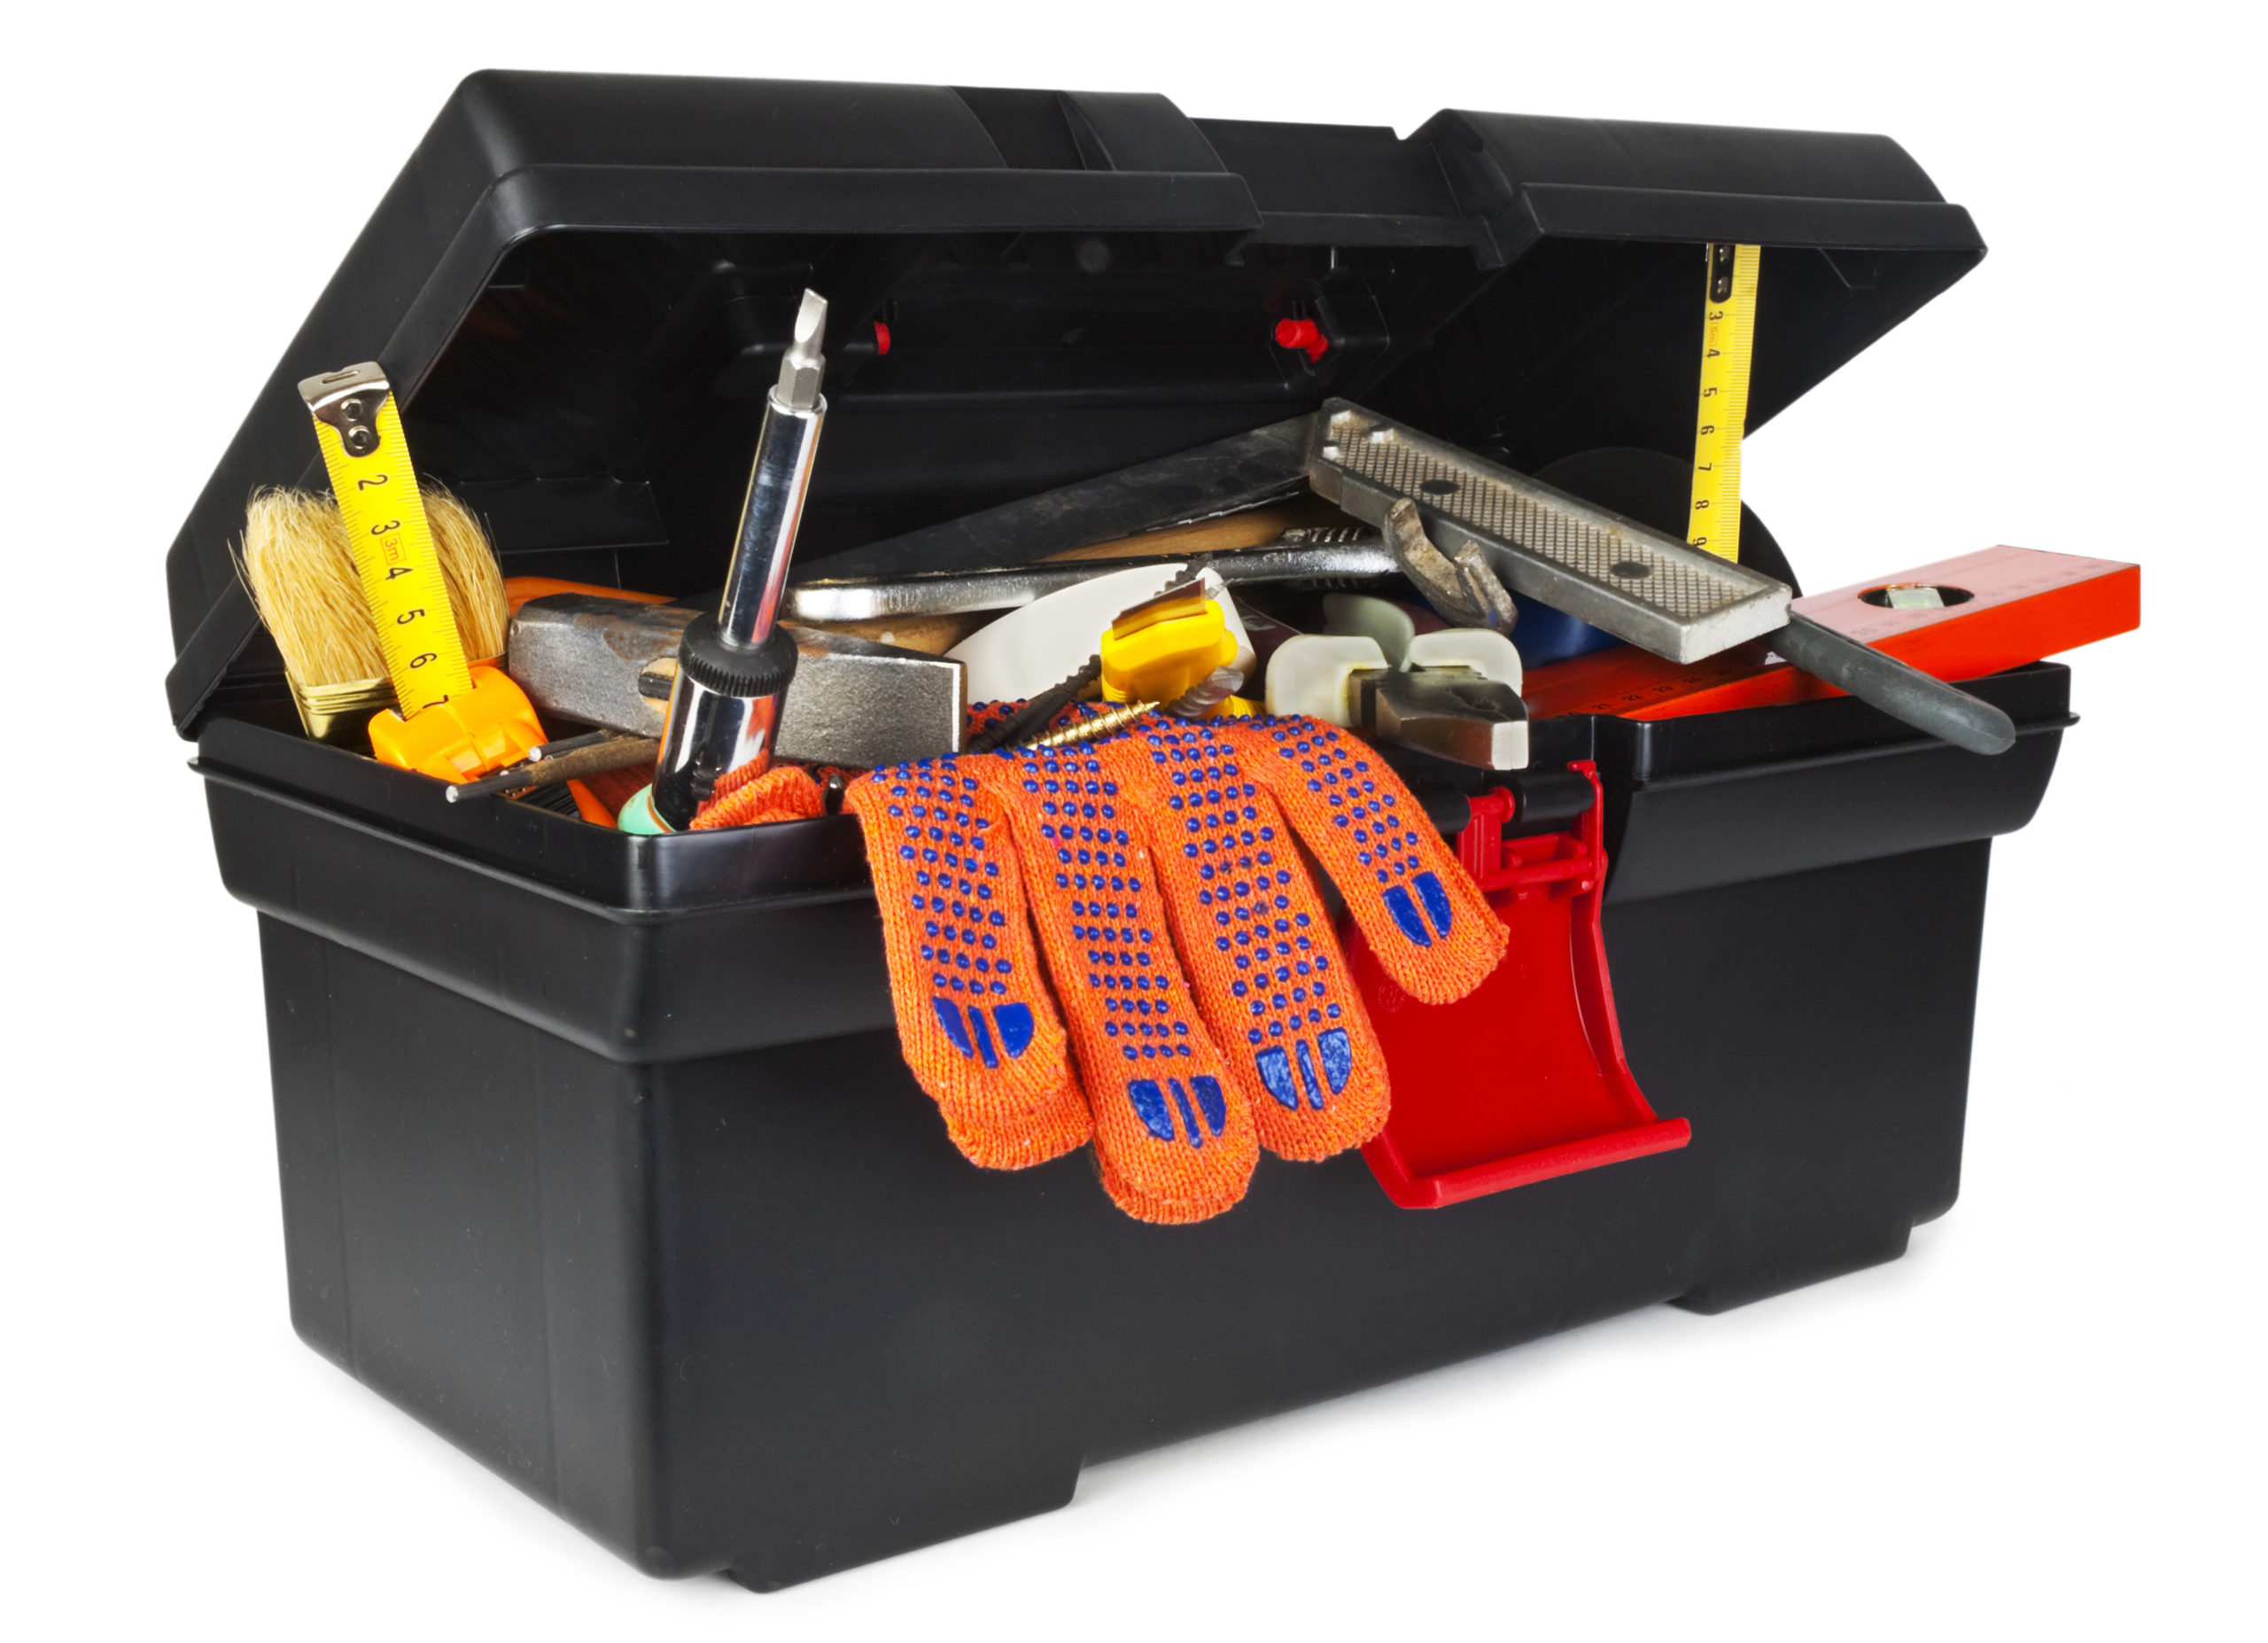 Ranking of the best tool boxes for 2020